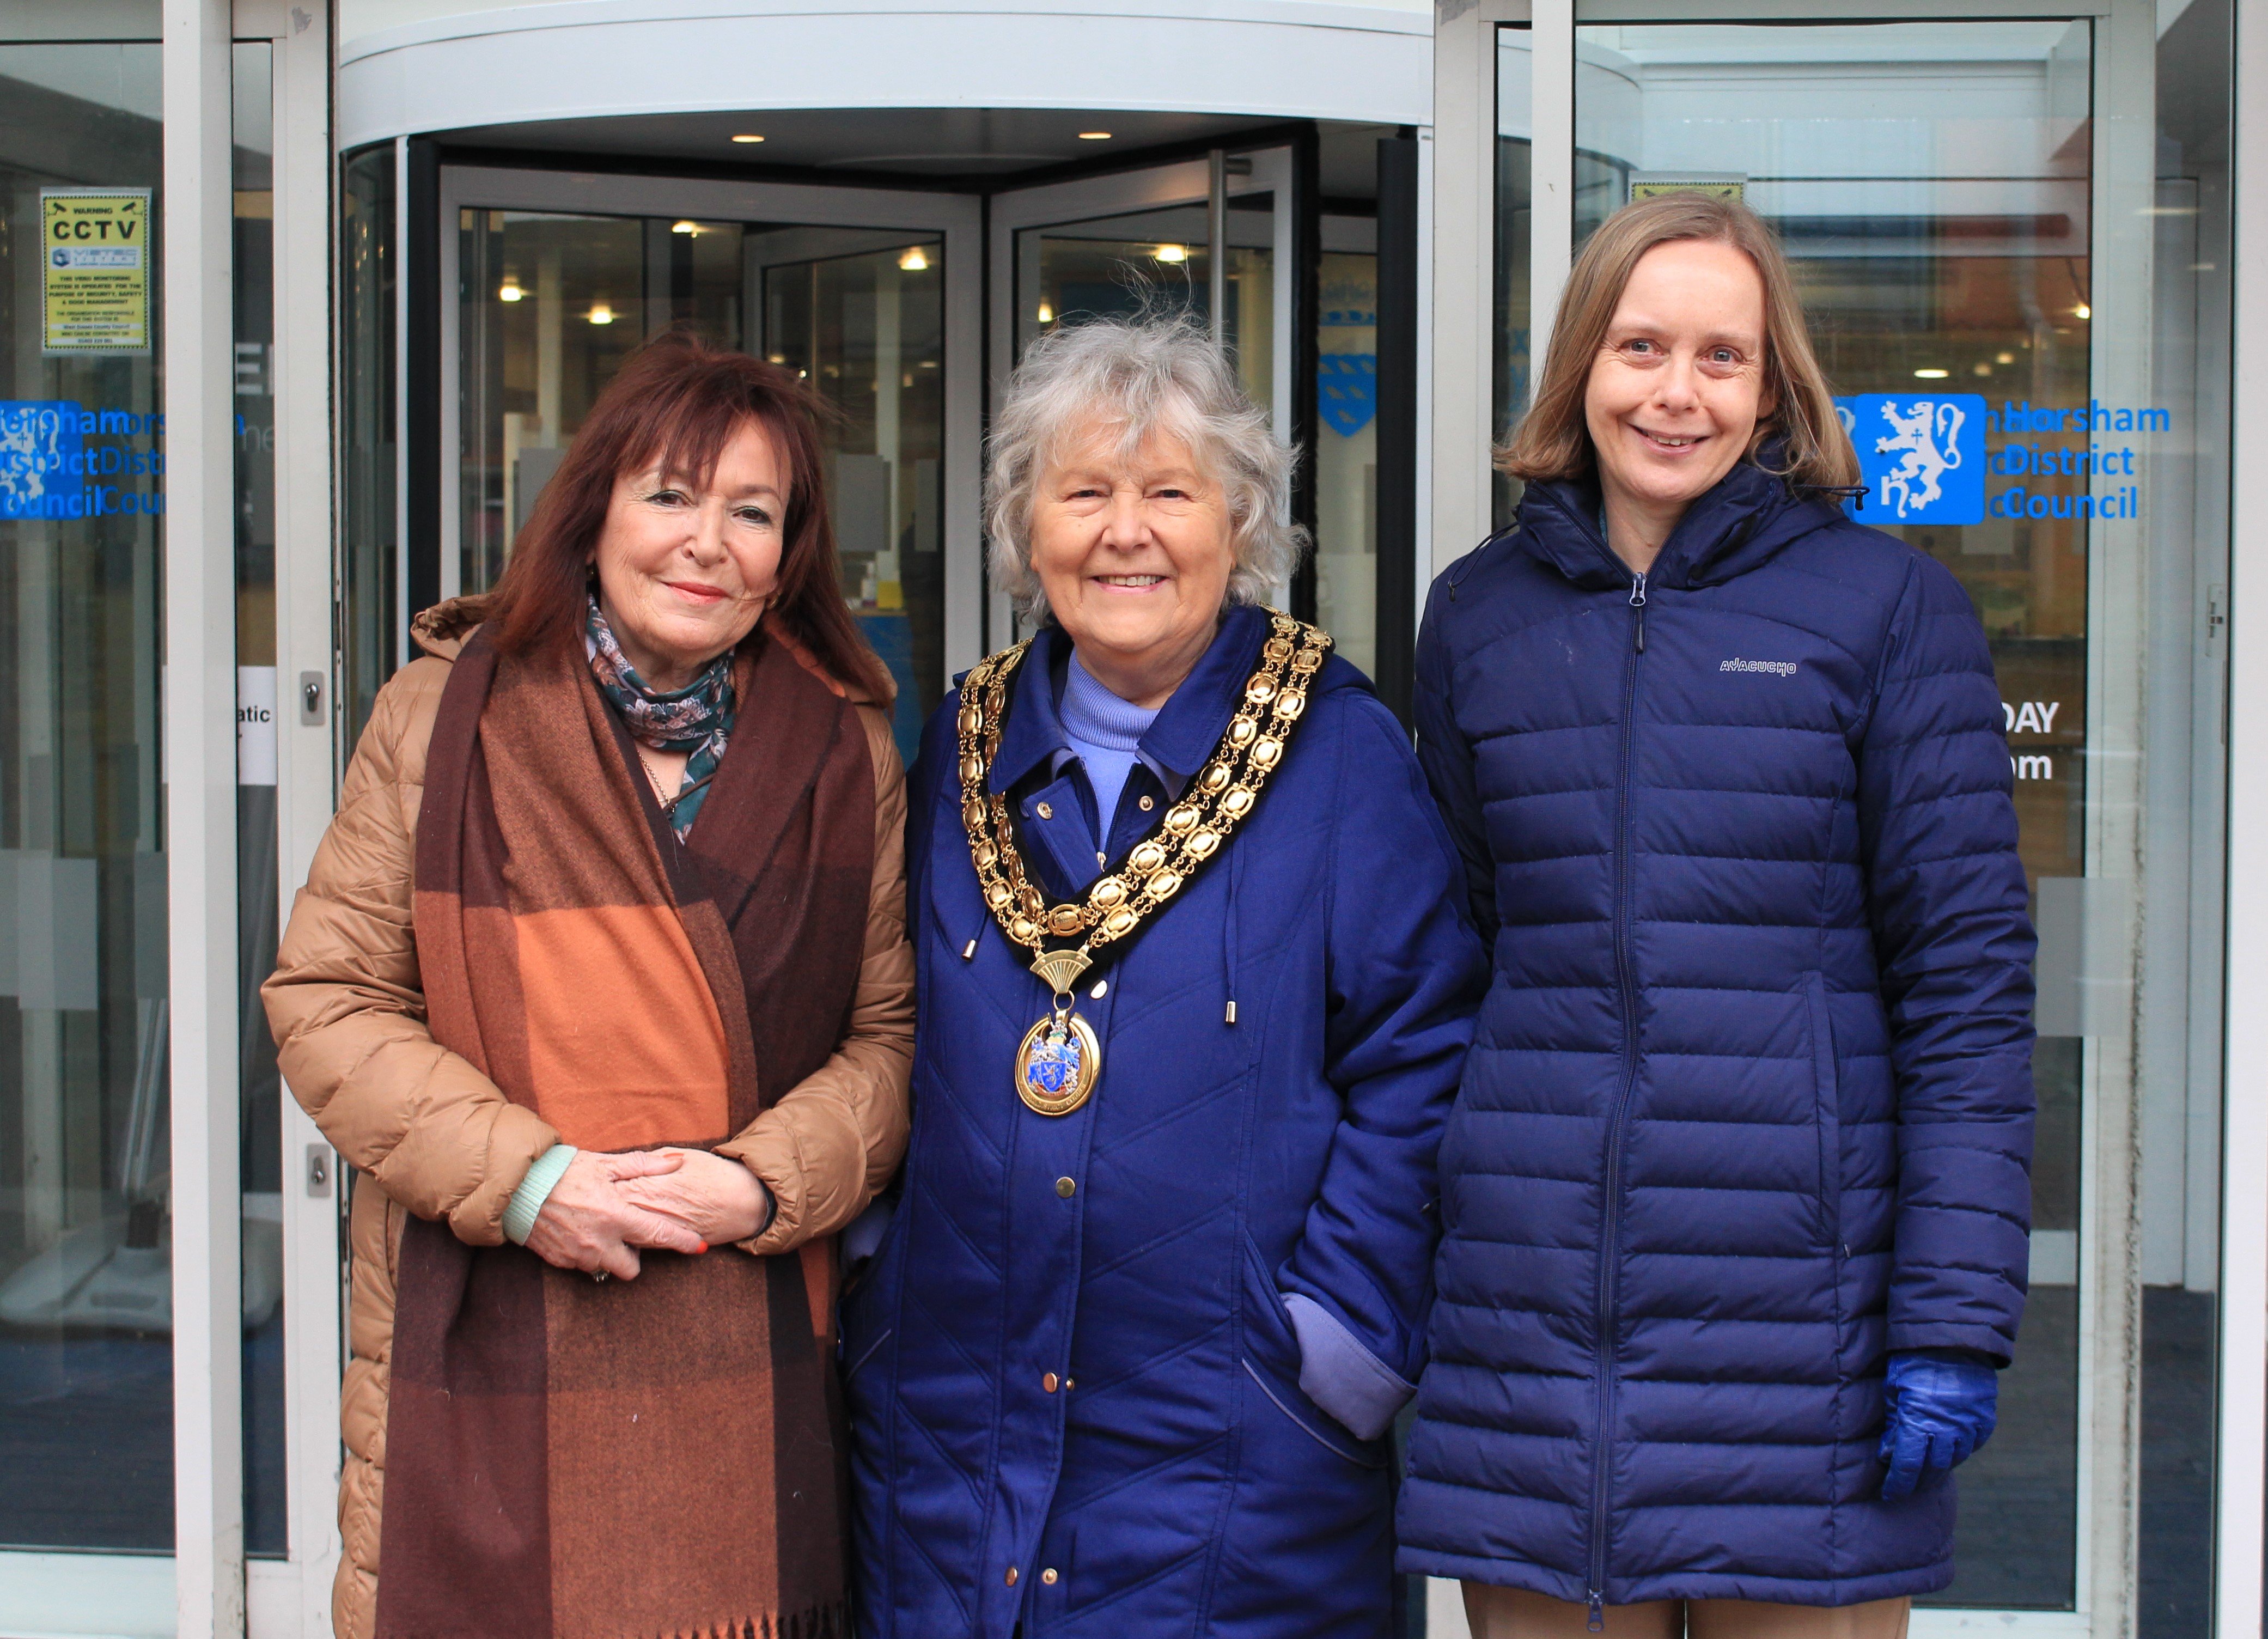 Including Leader Councillor Claire Vickers, Chairman Councillor Kate Rowbottom and Chief Executive Jane Eaton